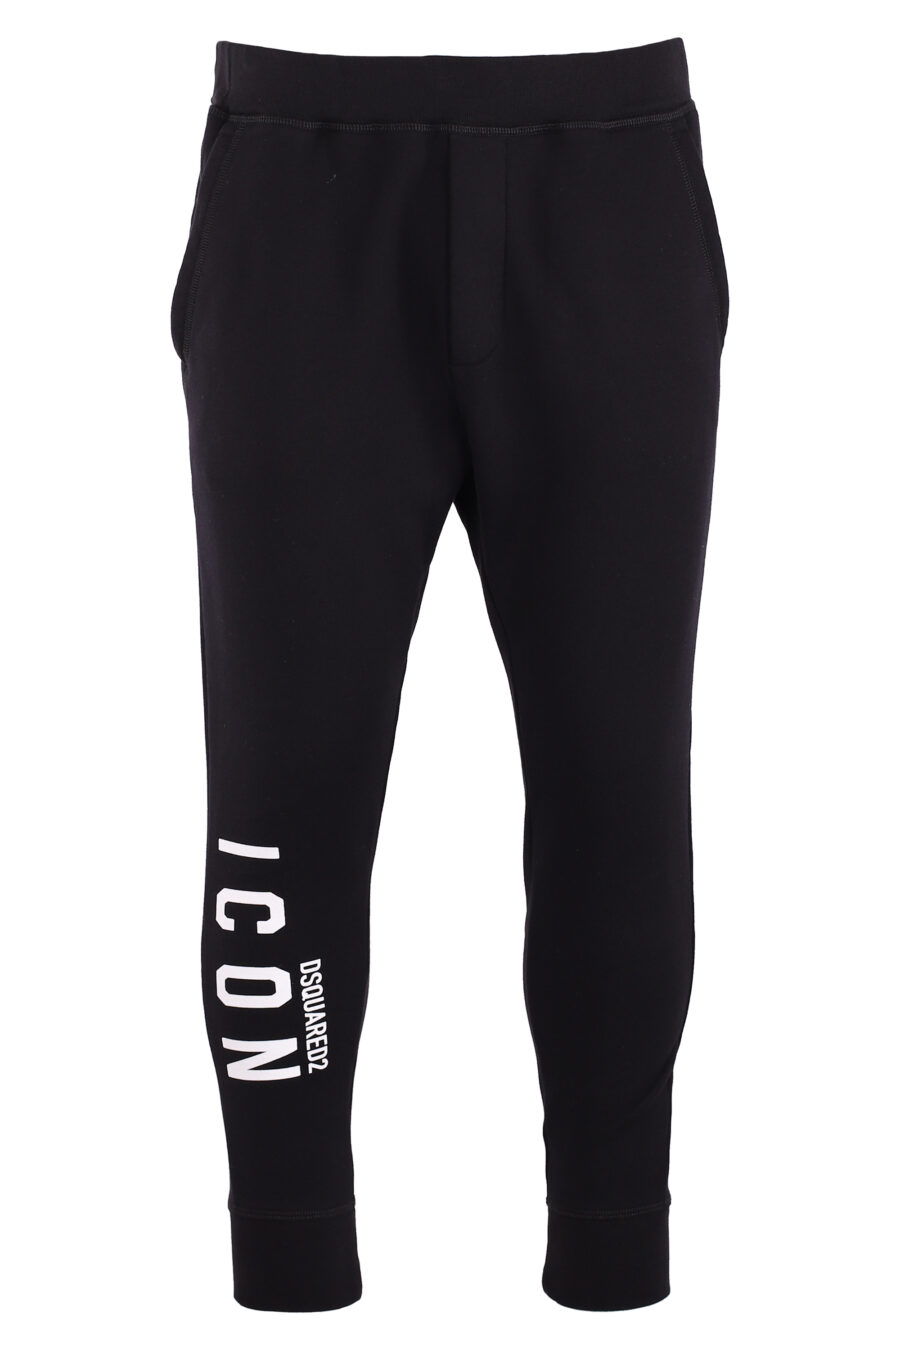 Tracksuit bottoms black "icon ski" with white vertical double logo - IMG 8967